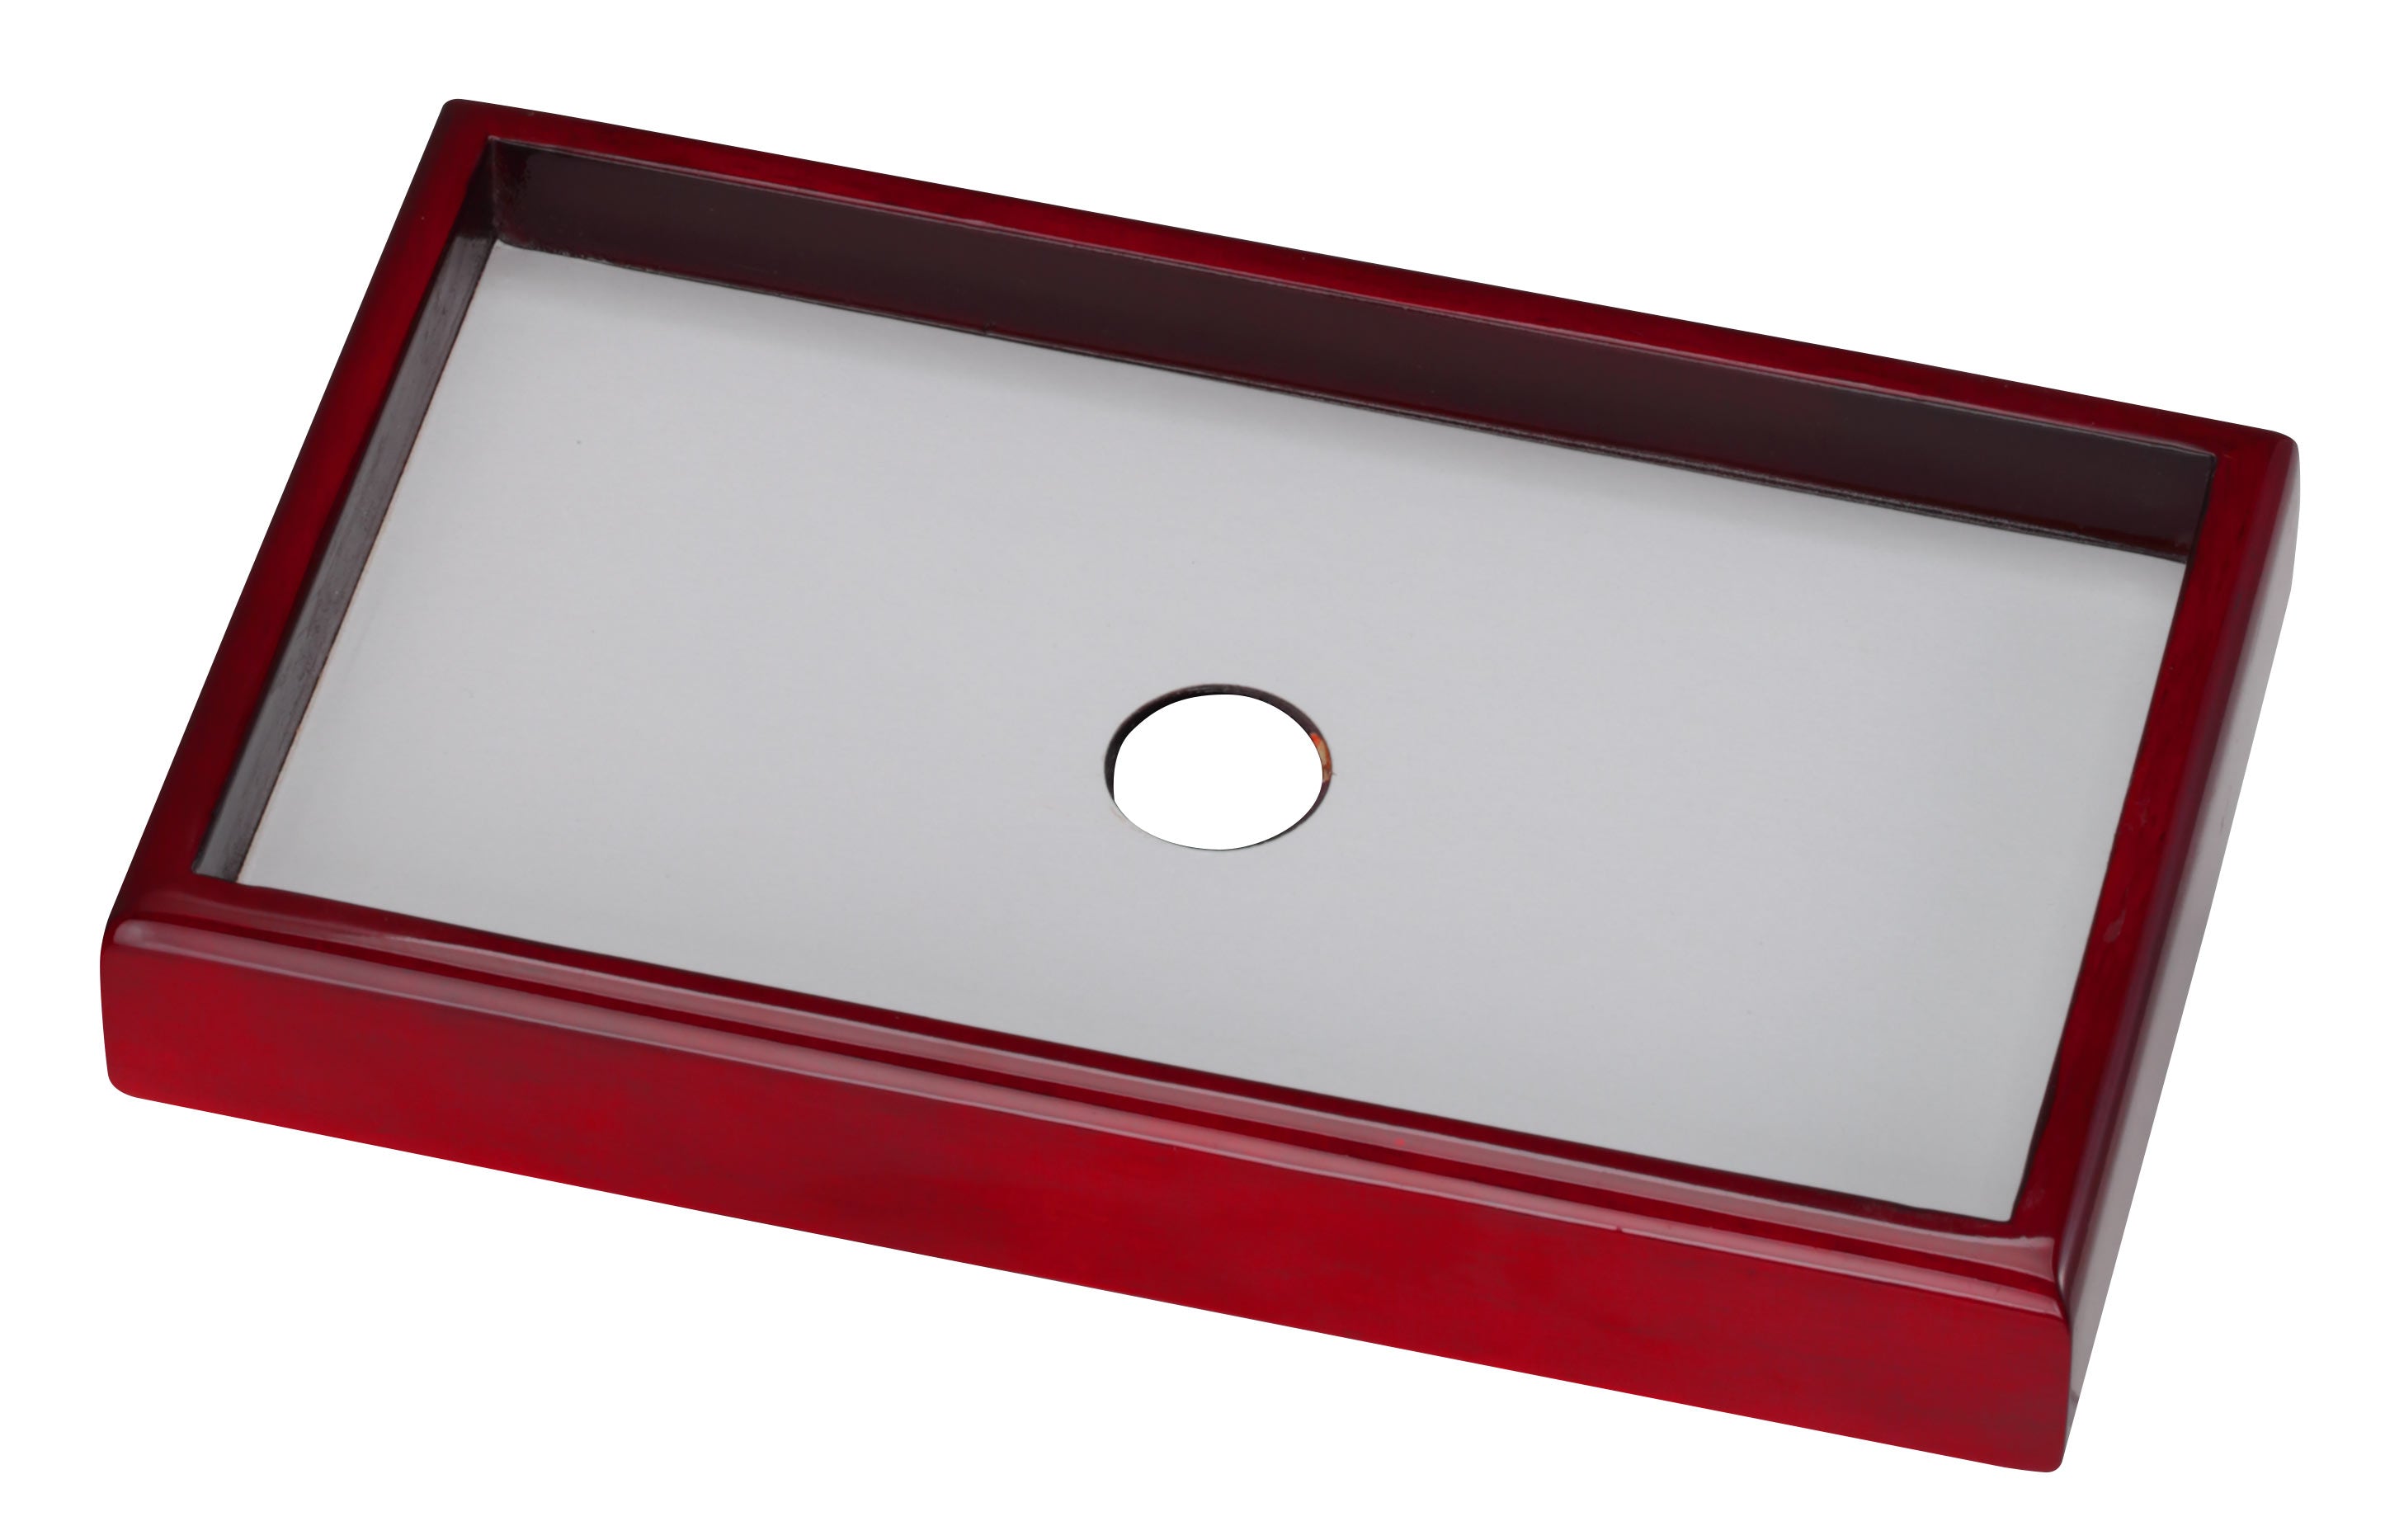 Configurable Outer Trays for 1 Inner Tray (Tray Only), 9" L x 5.5" W